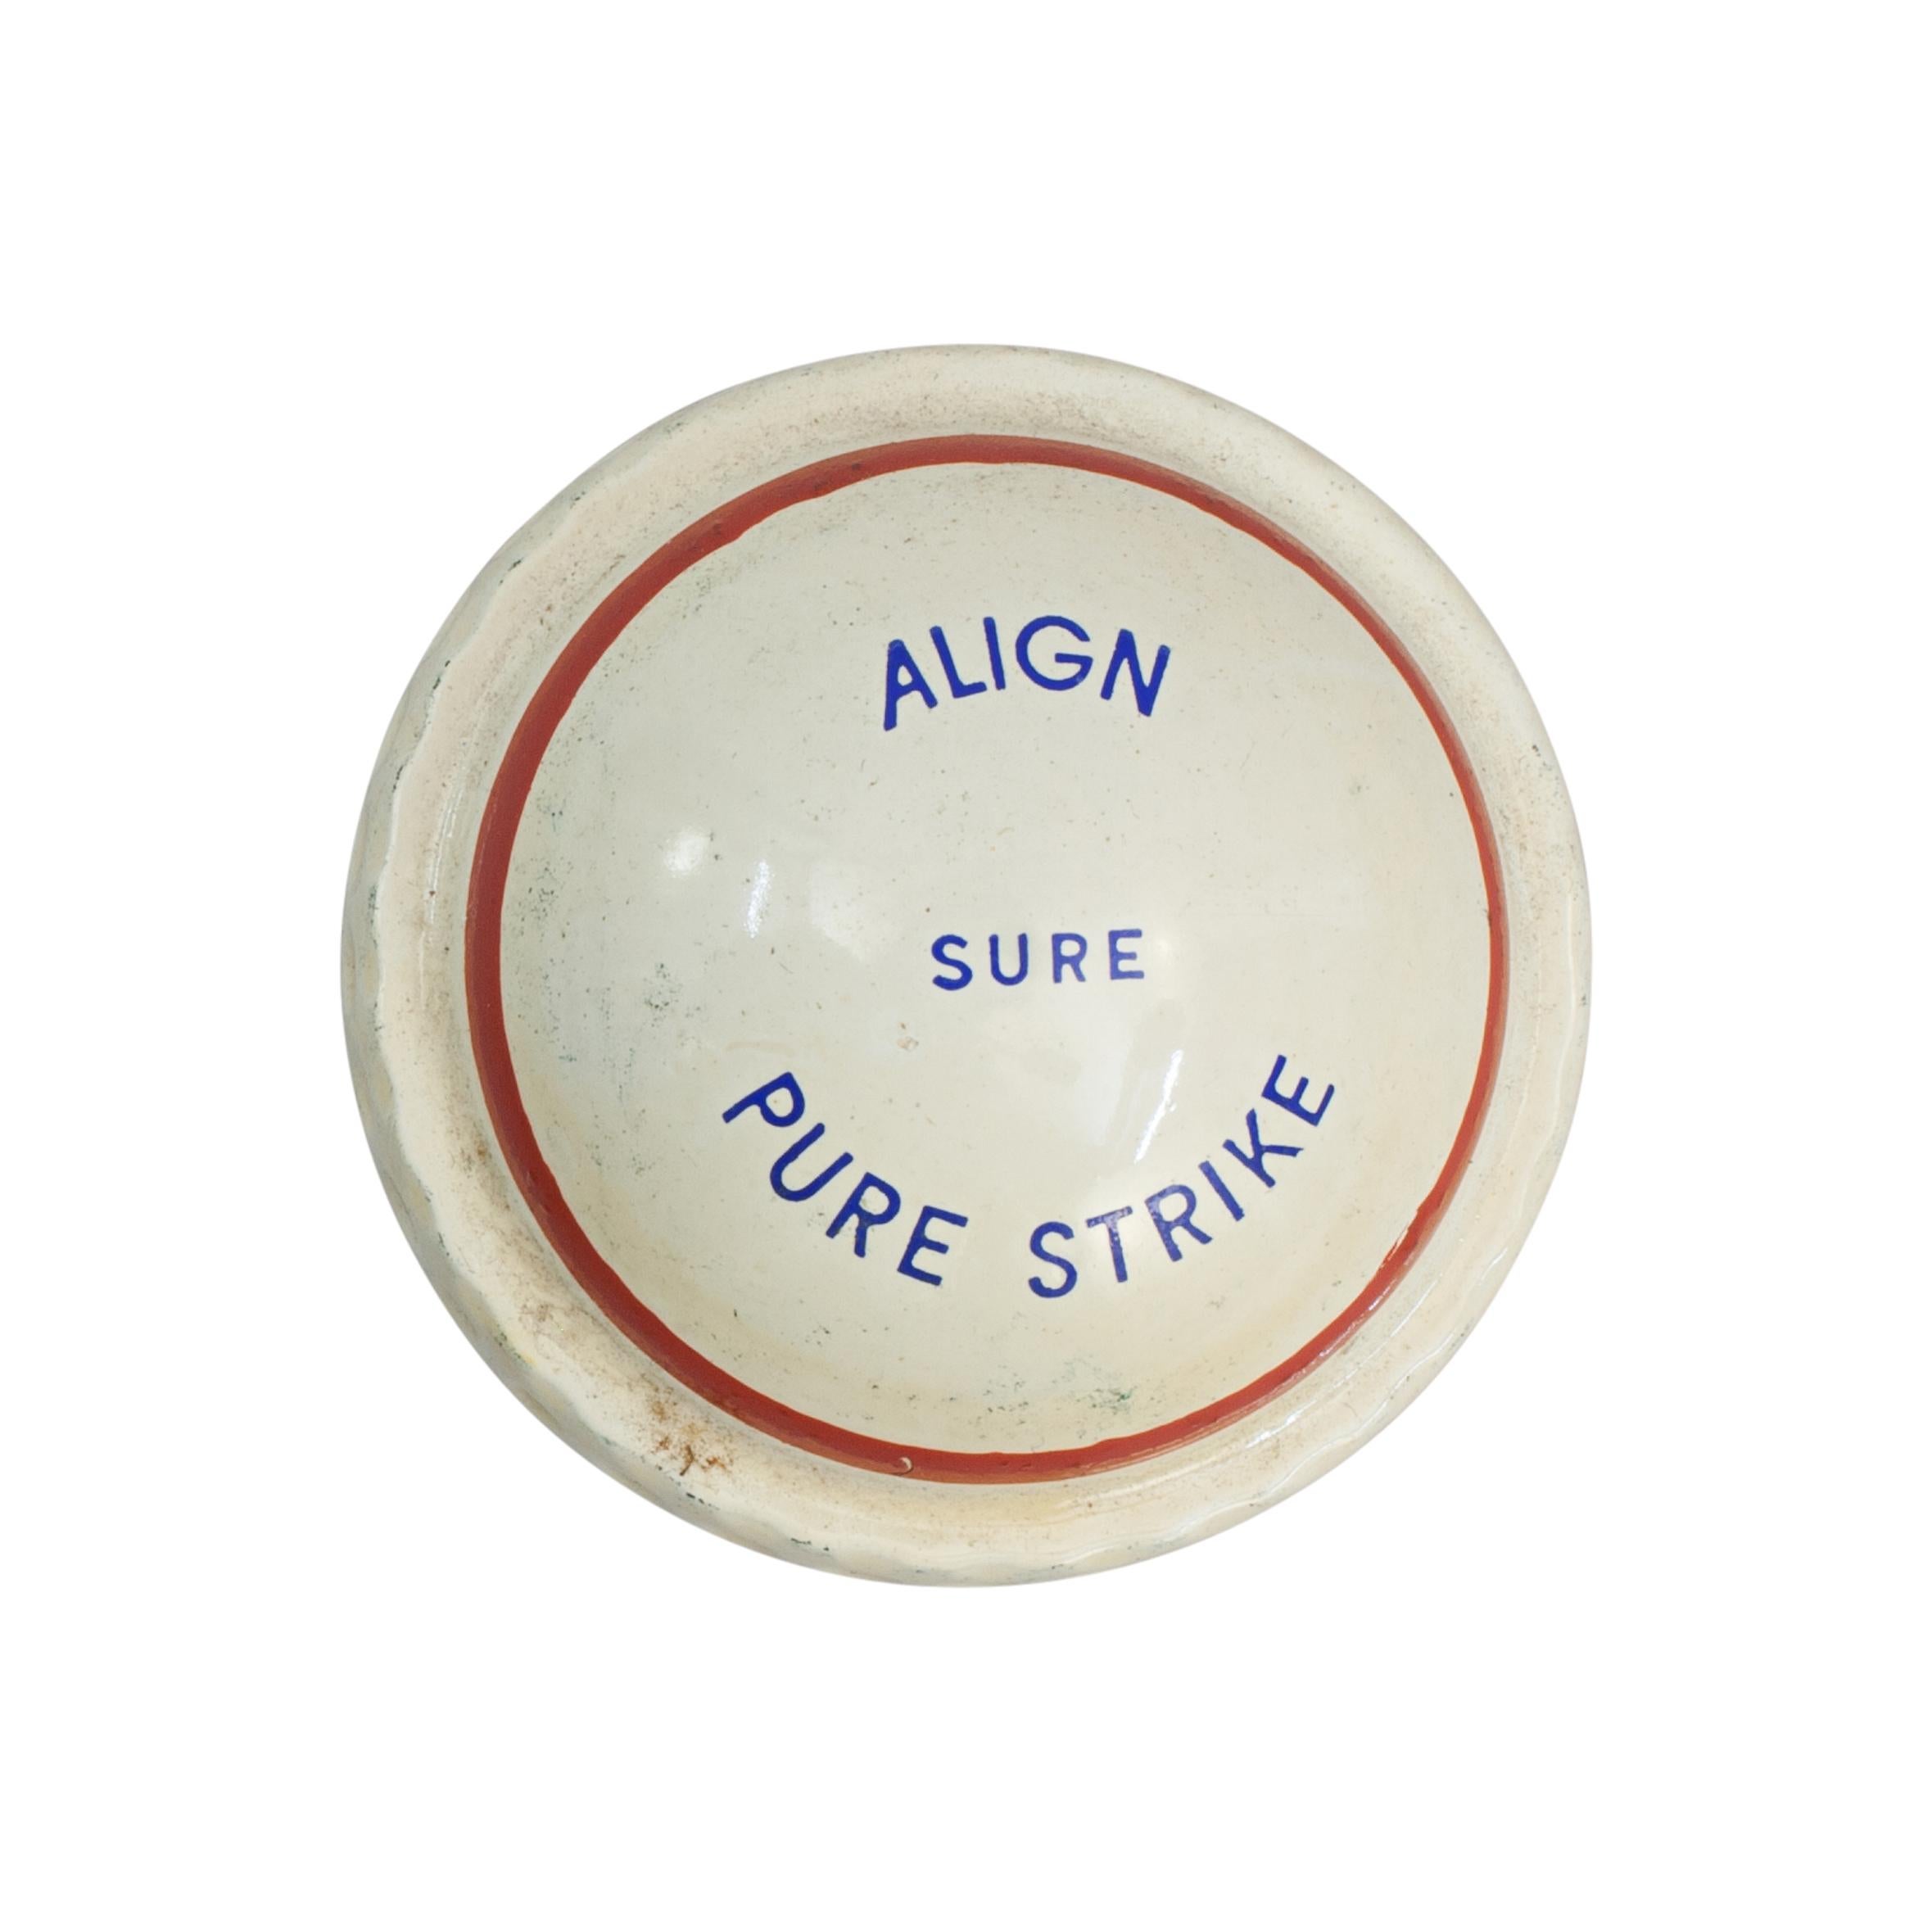 Rubber Vintage Practice Golf Ball, Align Pure Strike For Sale